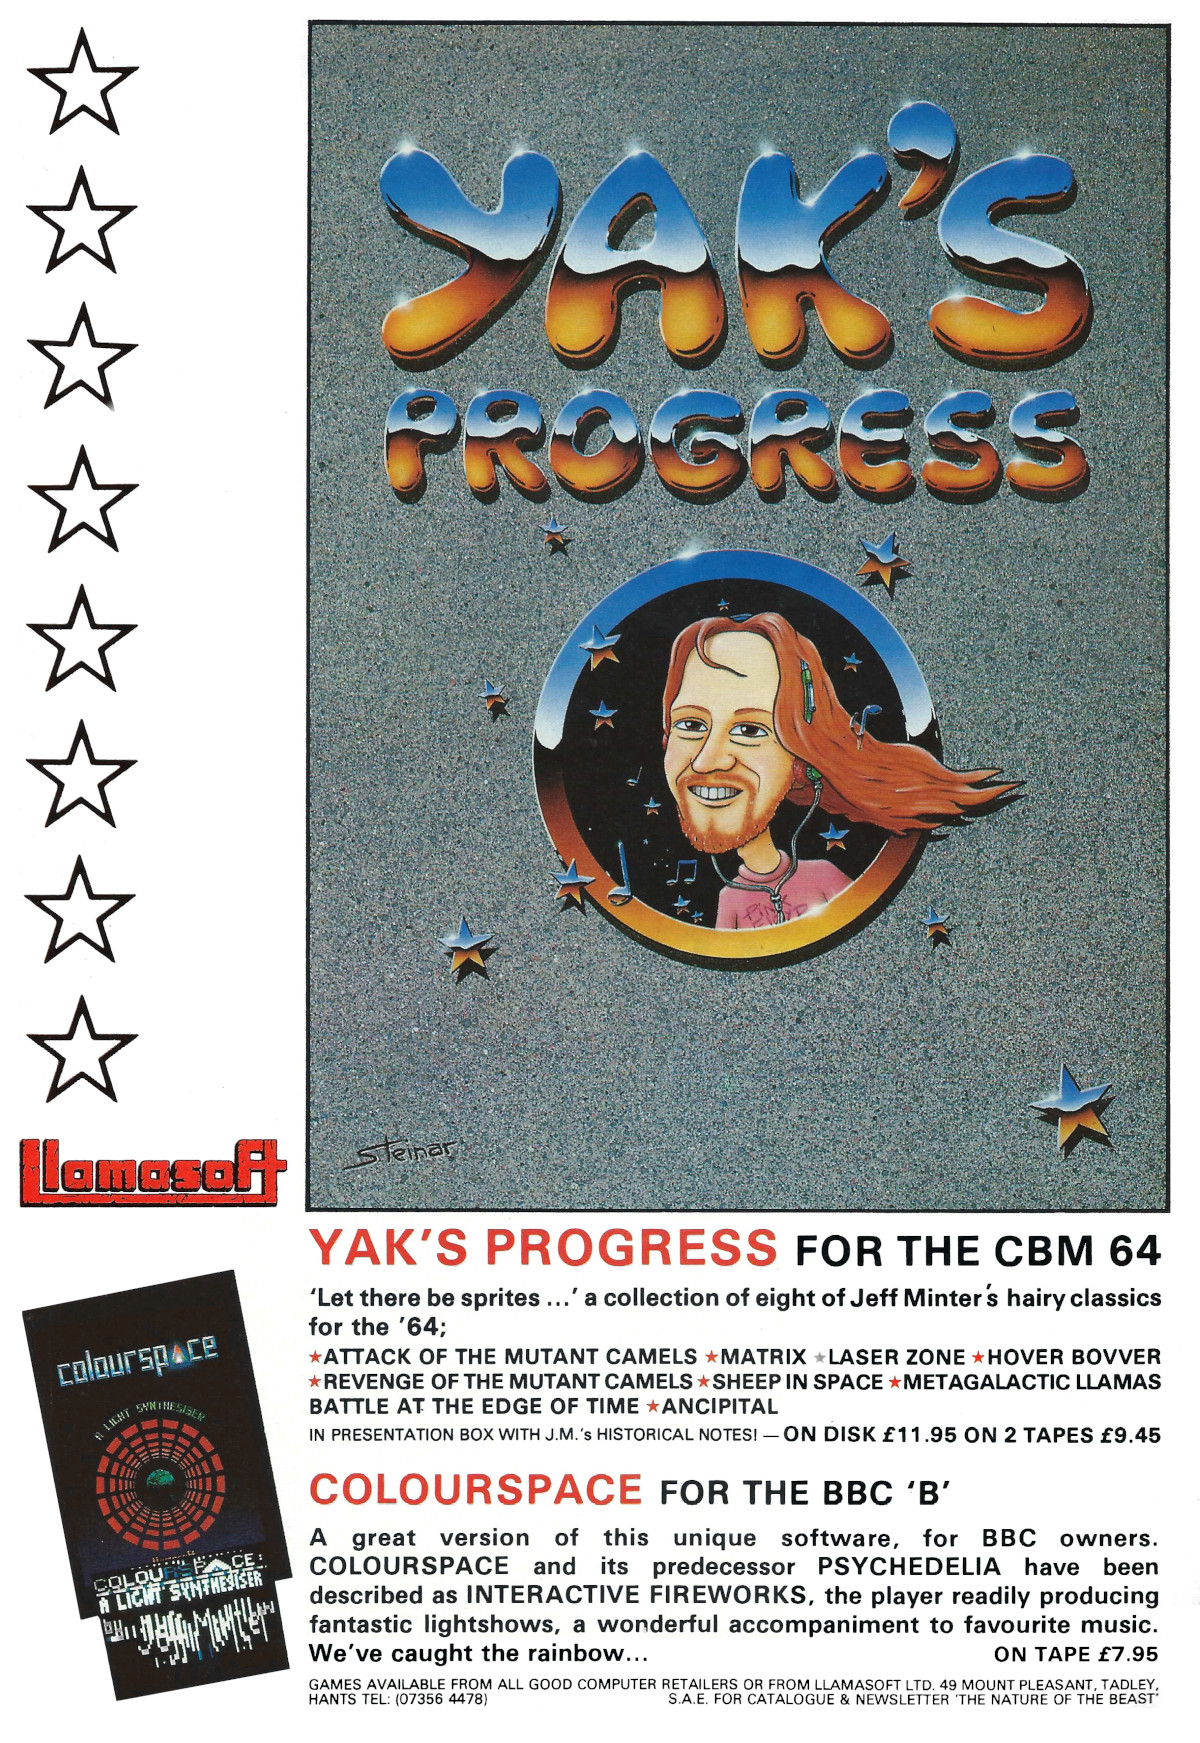 An advert for Yak's Progress - a collection featuring eight of Minter's ruminant-themed games, including Metagalactic Llamas Battle at the Edge of Time, and a version of Colourspace for the BBC Micro. From Commodore Horizons, December 1985